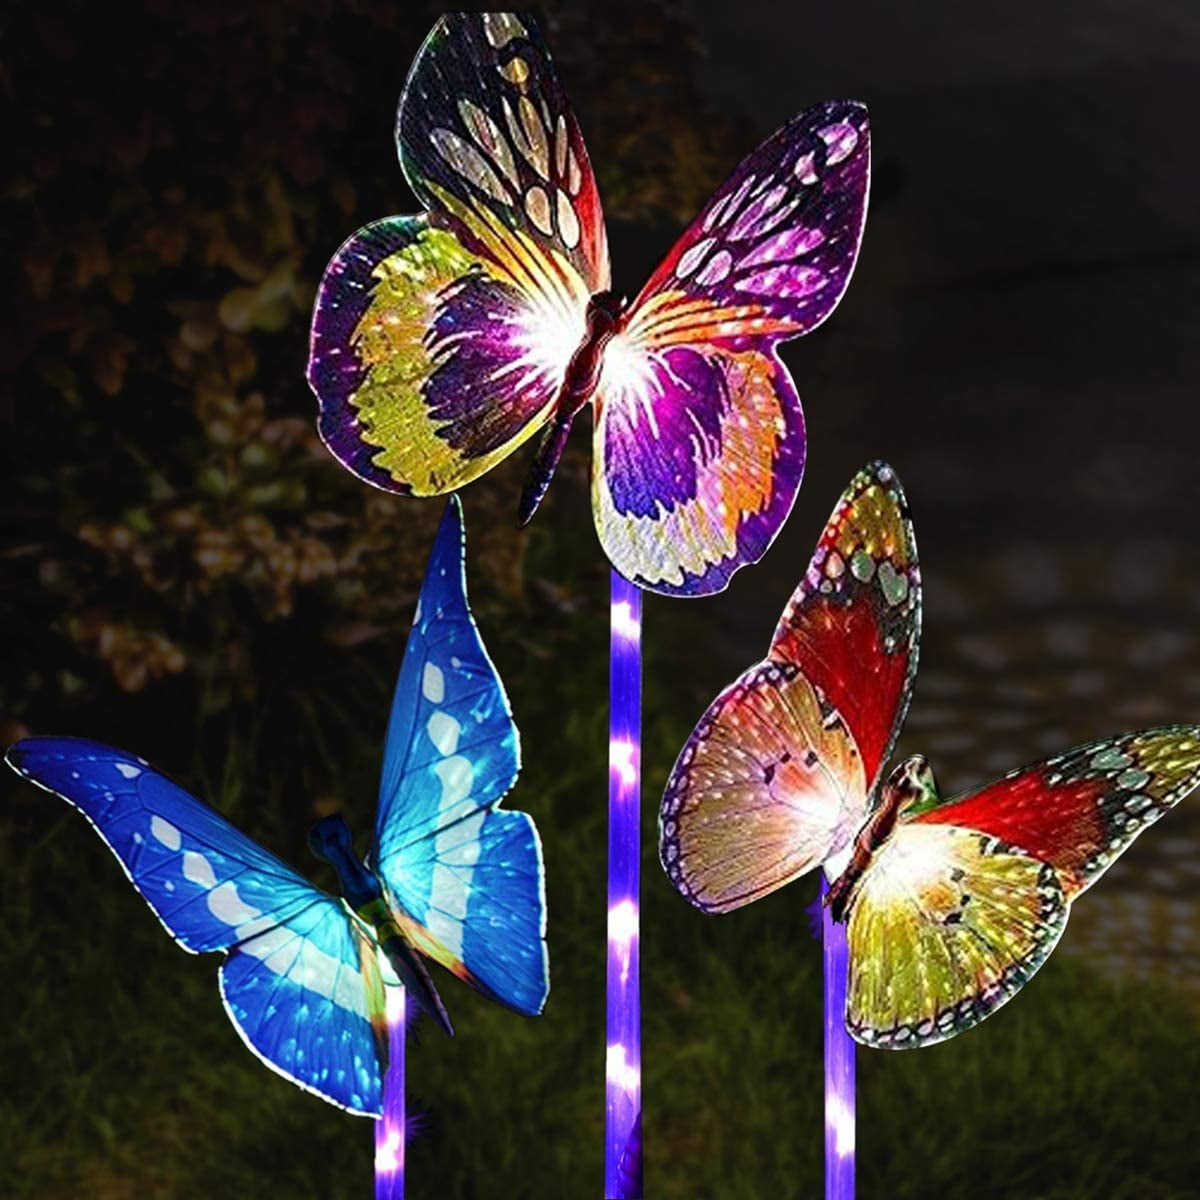 Solar Lights Outdoor, Waterproof Solar Garden Lights, Multi-Color Changing Solar Butterfly Lights for Outdoor Path, Yard, Lawn(1pc)